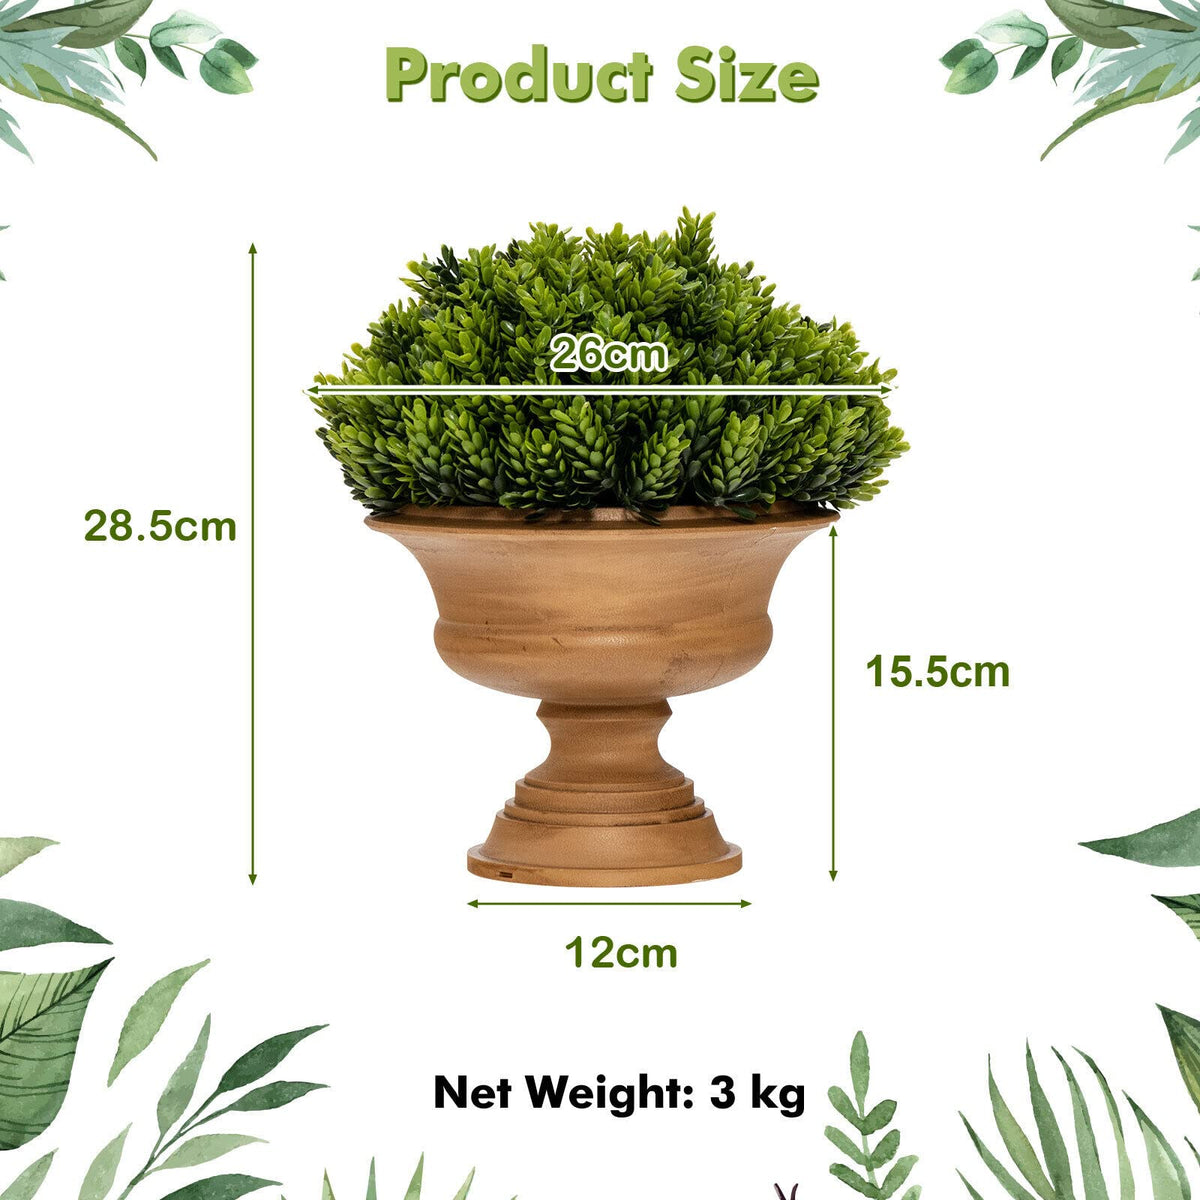 Giantex 4-Set Artificial Plants, Mini Fake Potted Plants, Small Greenery Plants for Home Office Desk Dining Table Desk Decoration